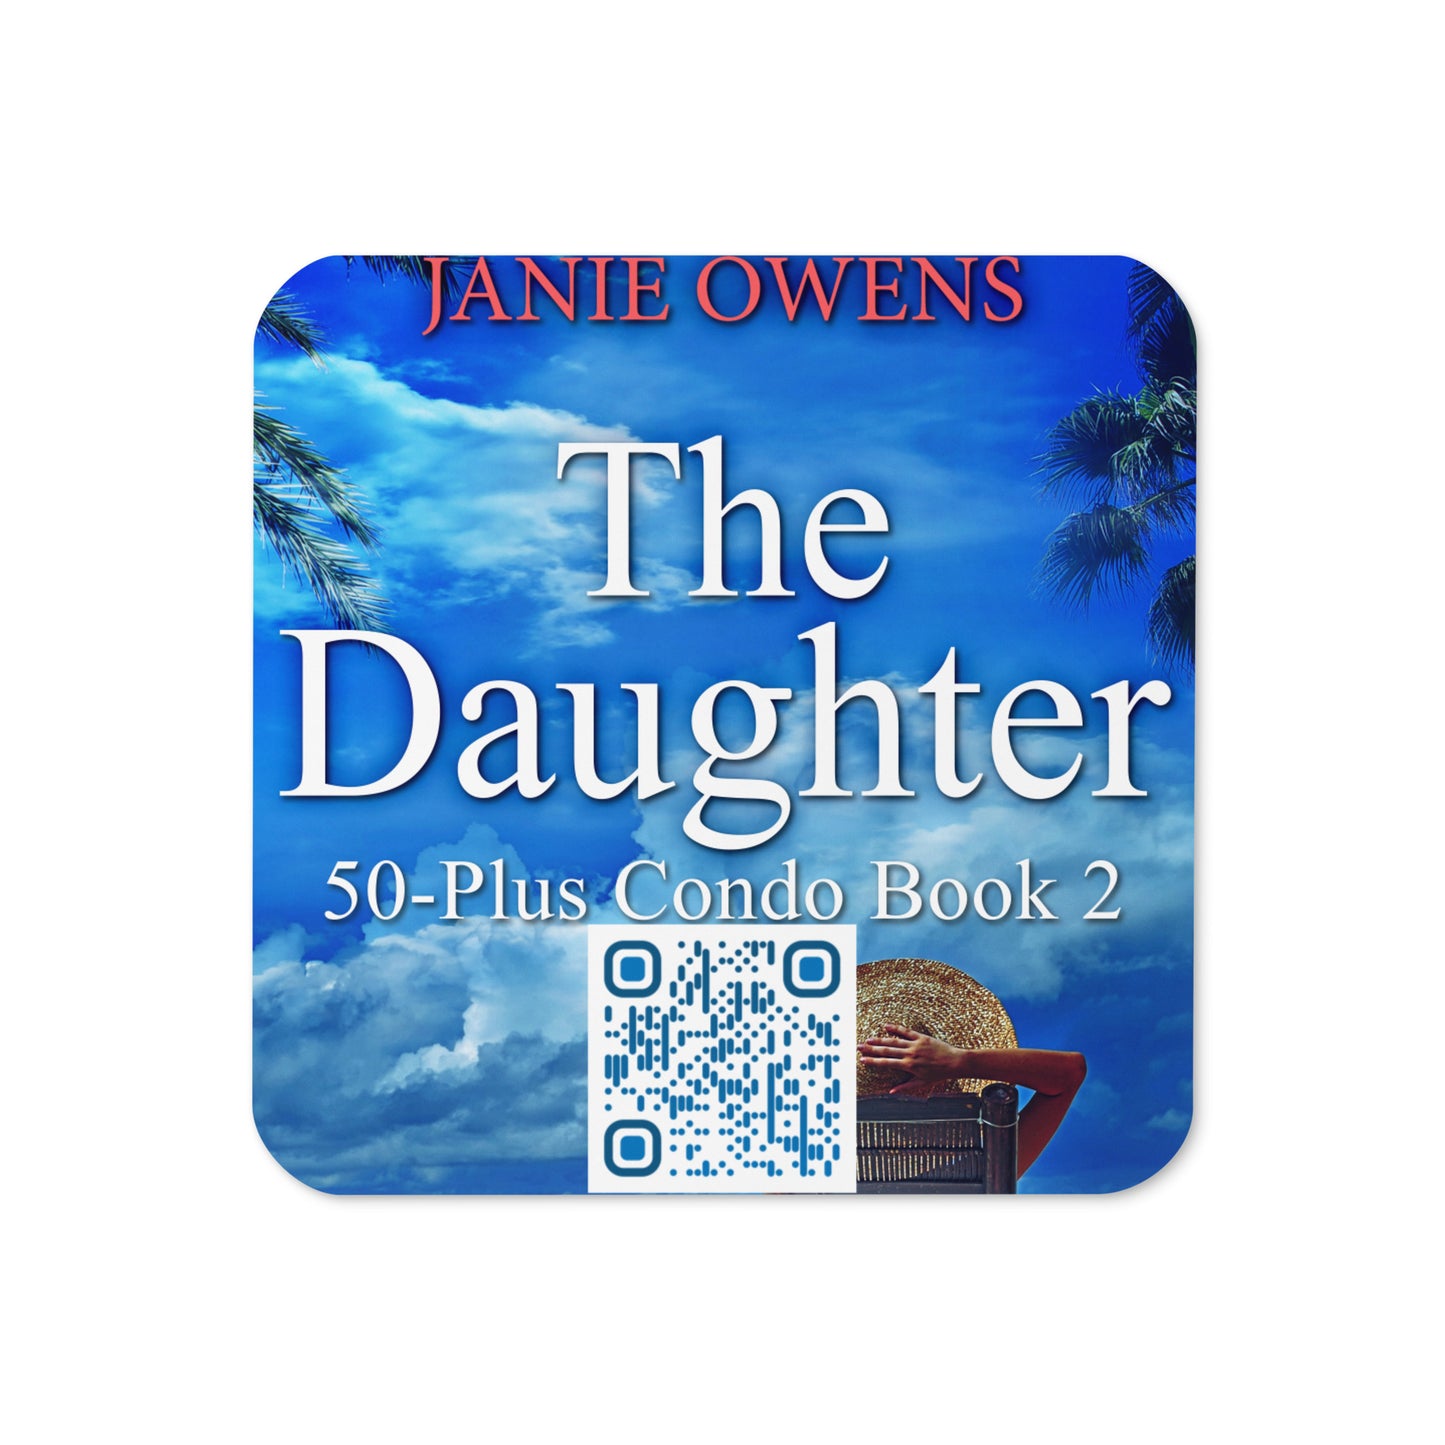 coaster with cover art from Janie Owens's book The Daughter